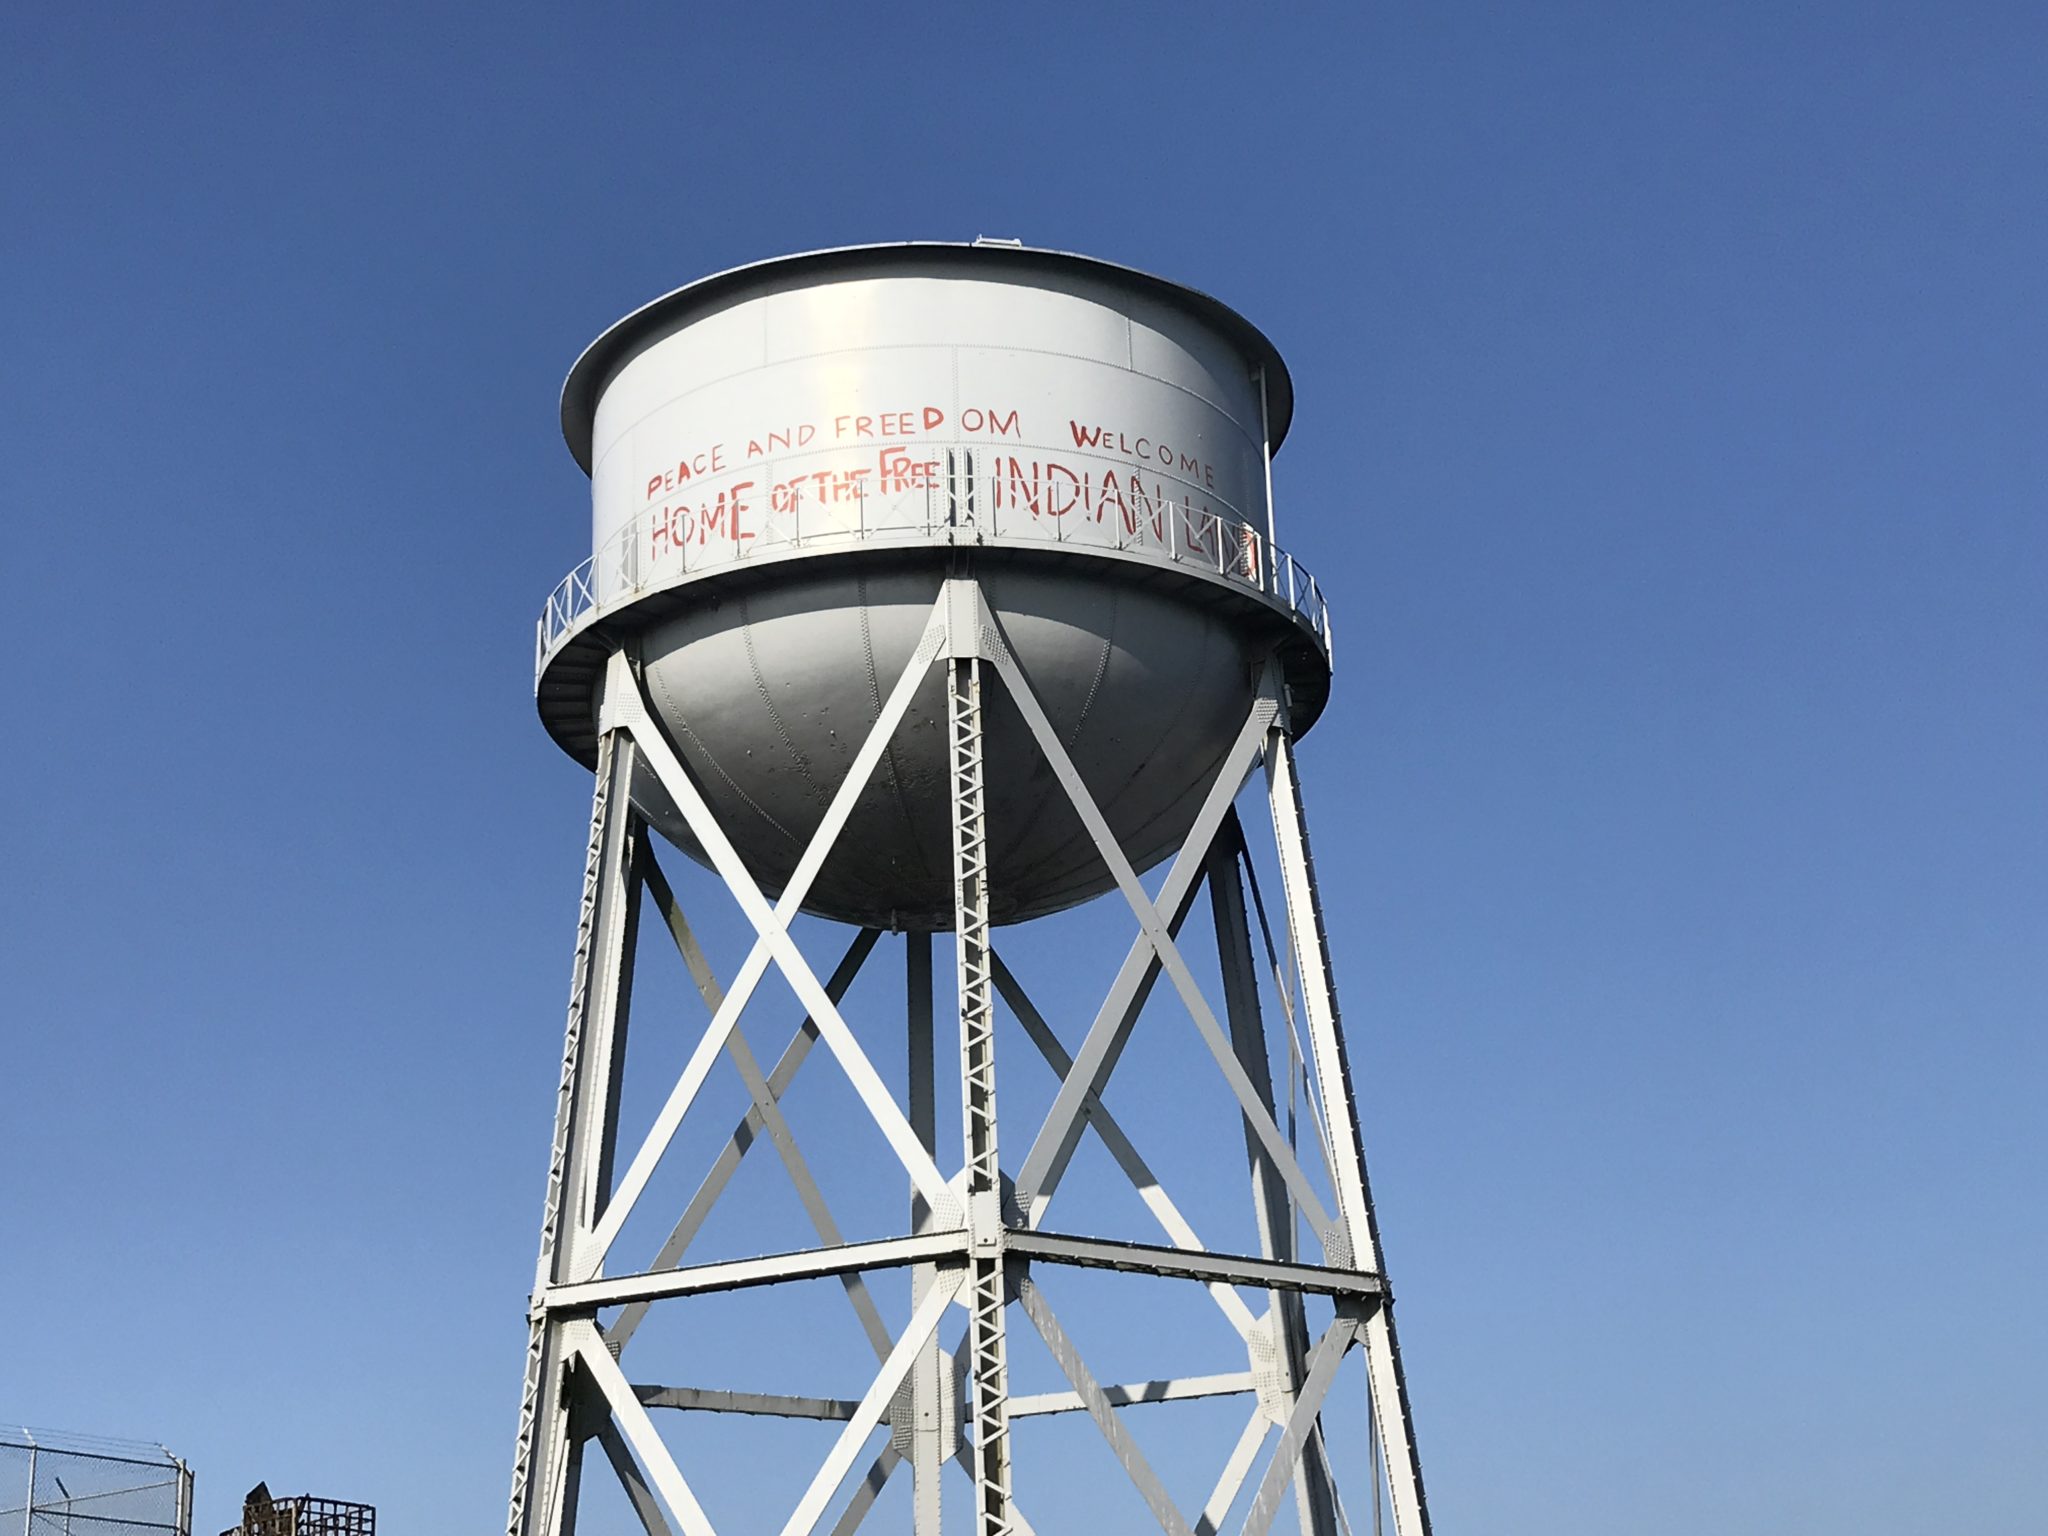 a water tower with graffiti on it